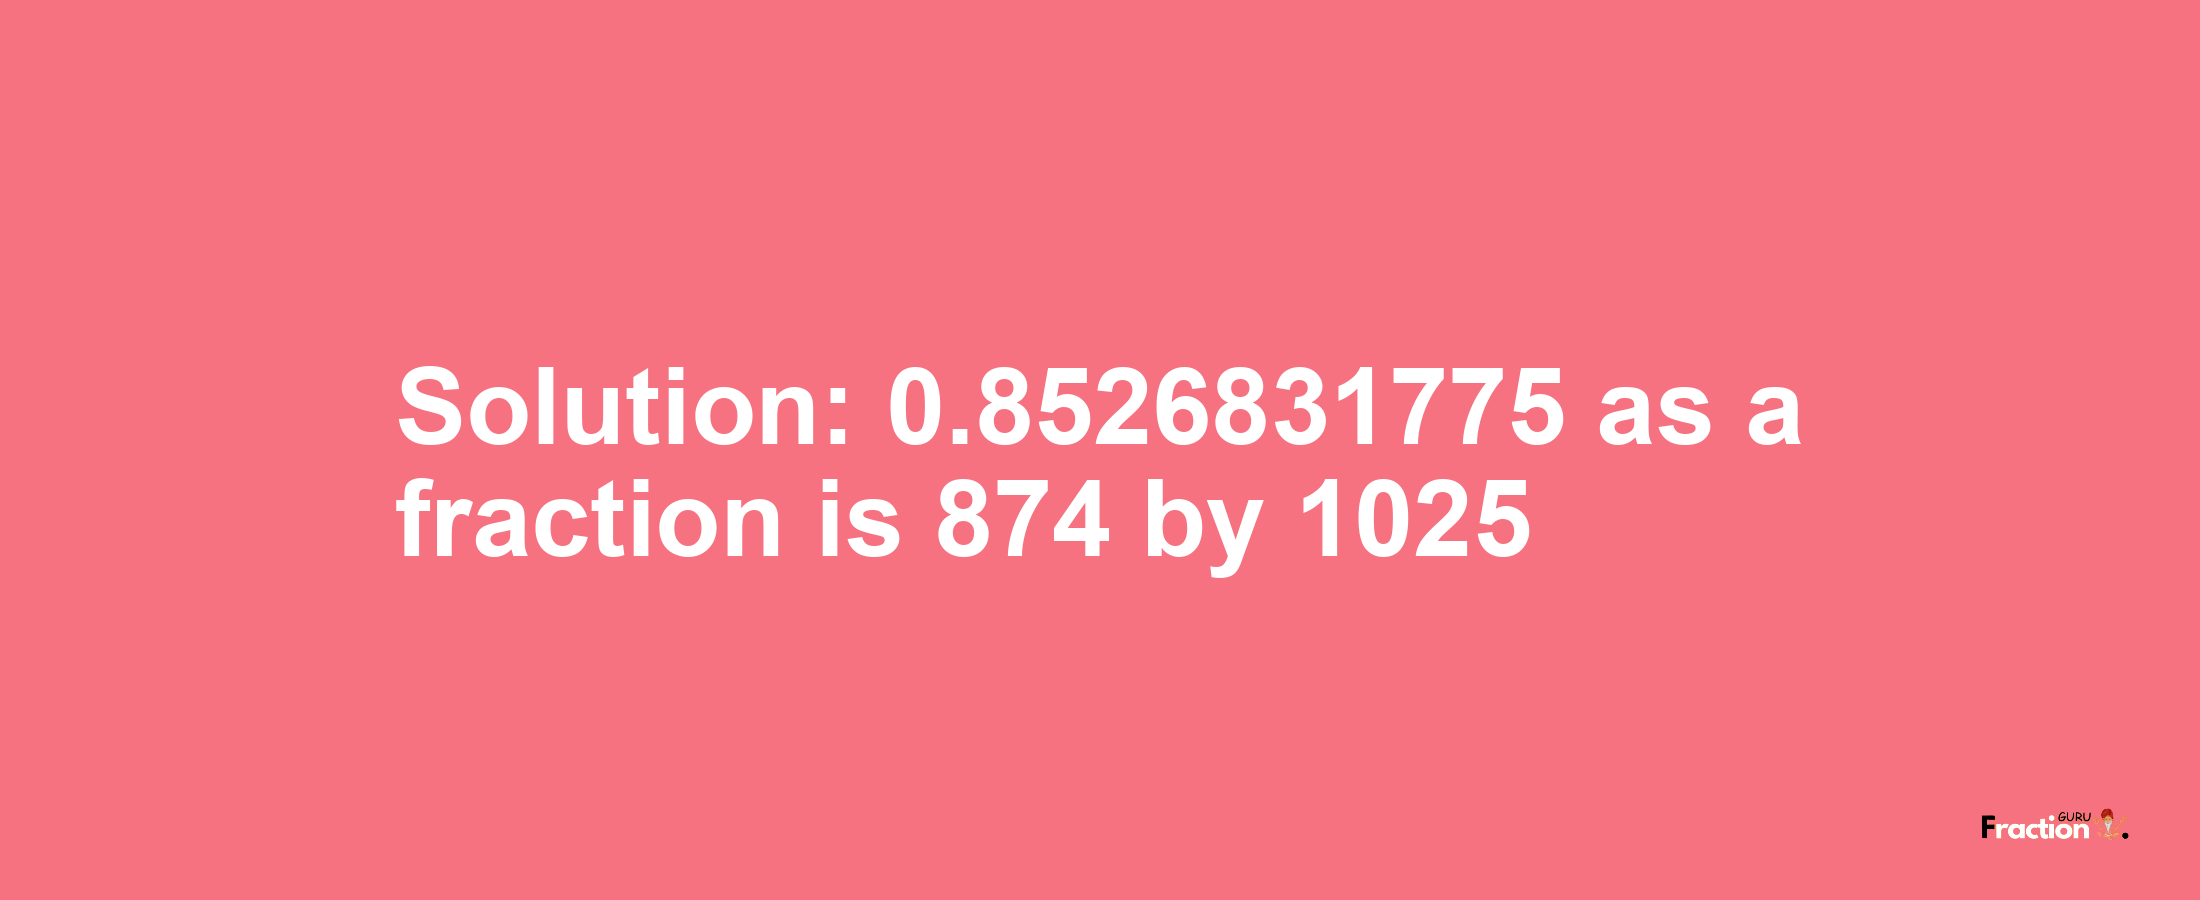 Solution:0.8526831775 as a fraction is 874/1025